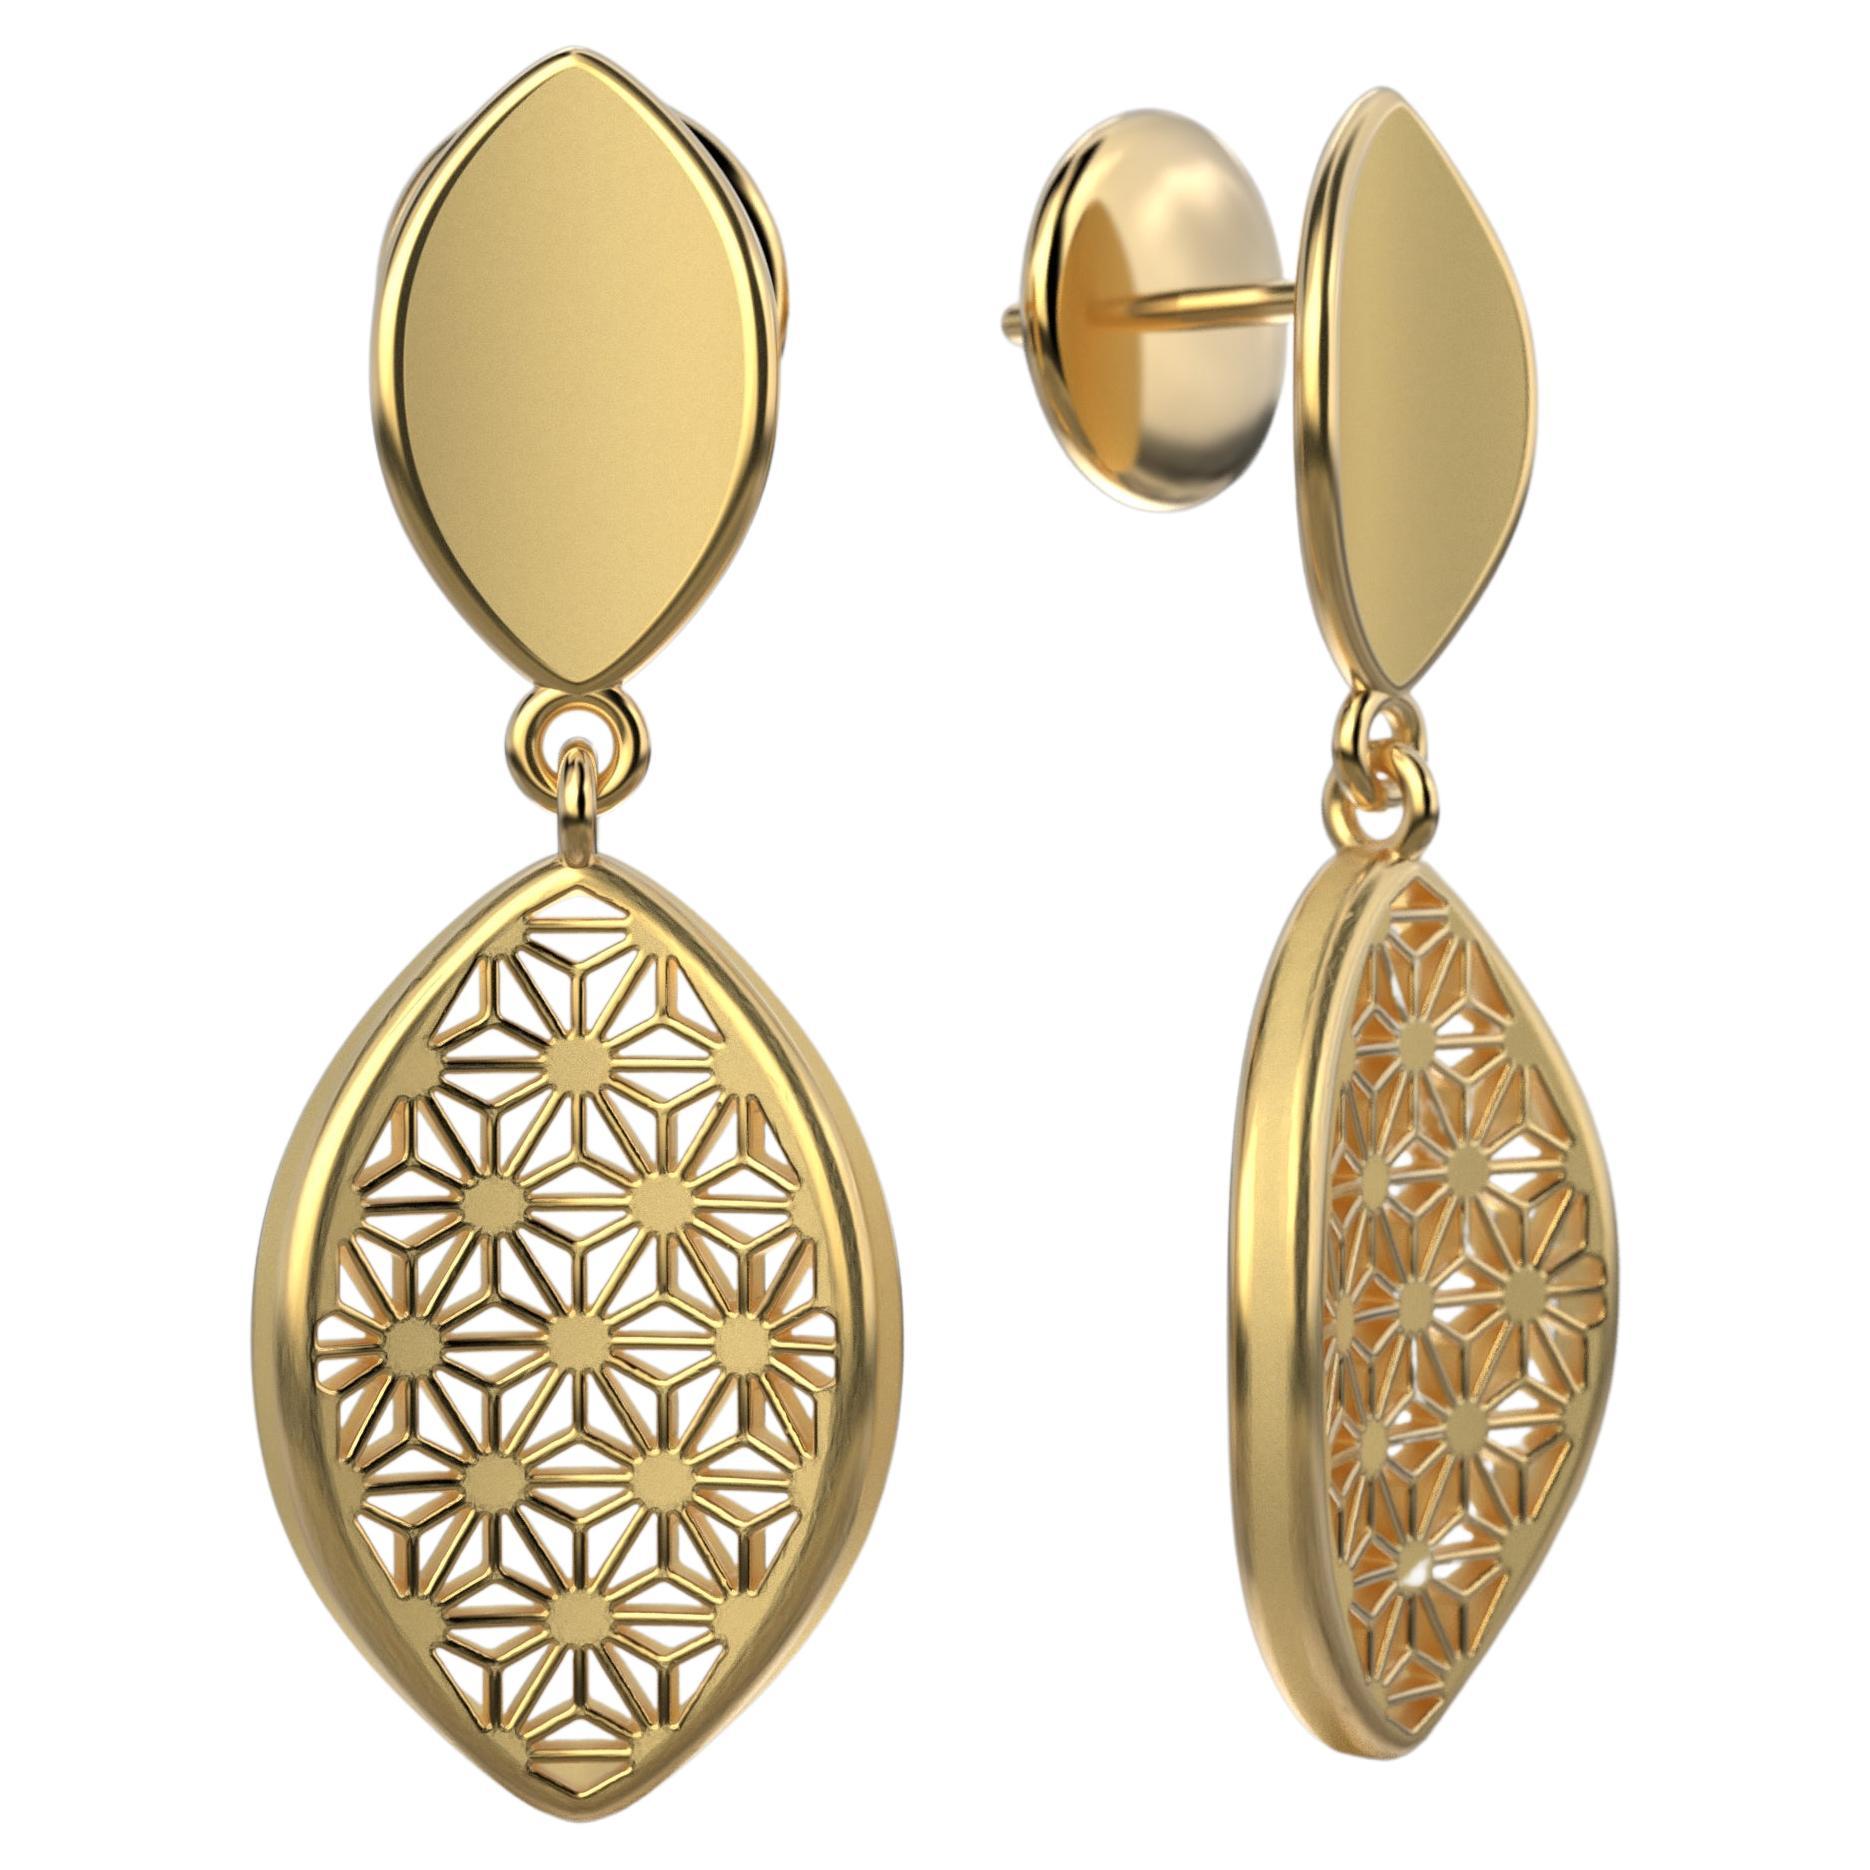 Sashiko Pattern Earrings Made in Italy in 18k Gold By Oltremare Gioielli For Sale